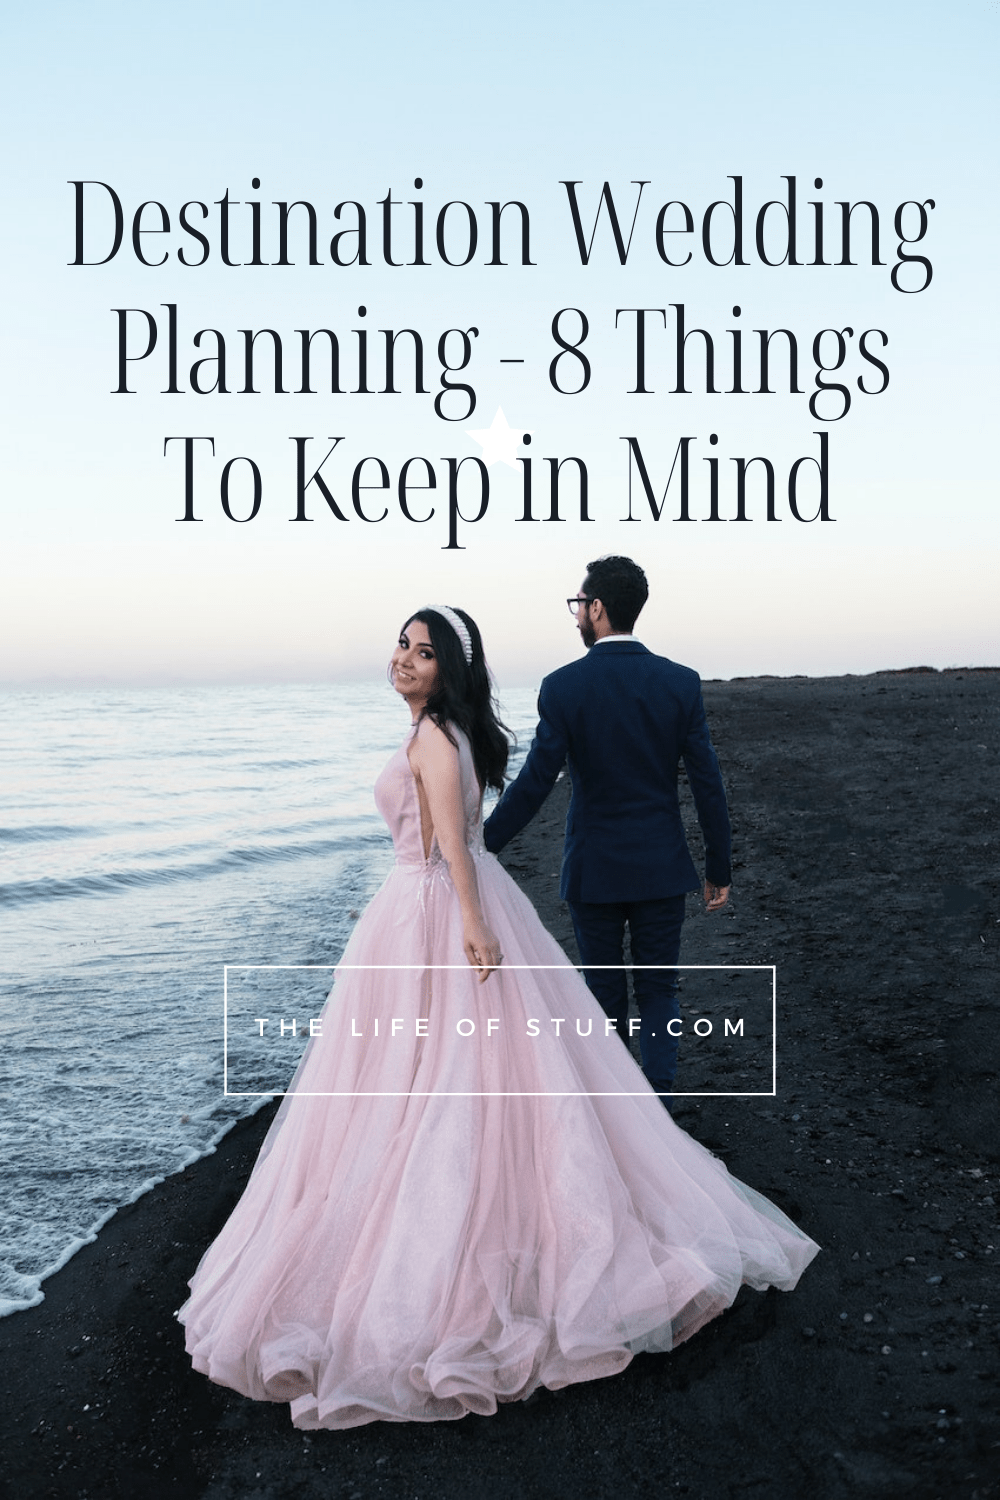 Destination Wedding Planning - 8 Things To Keep in Mind - The Life of Stuff